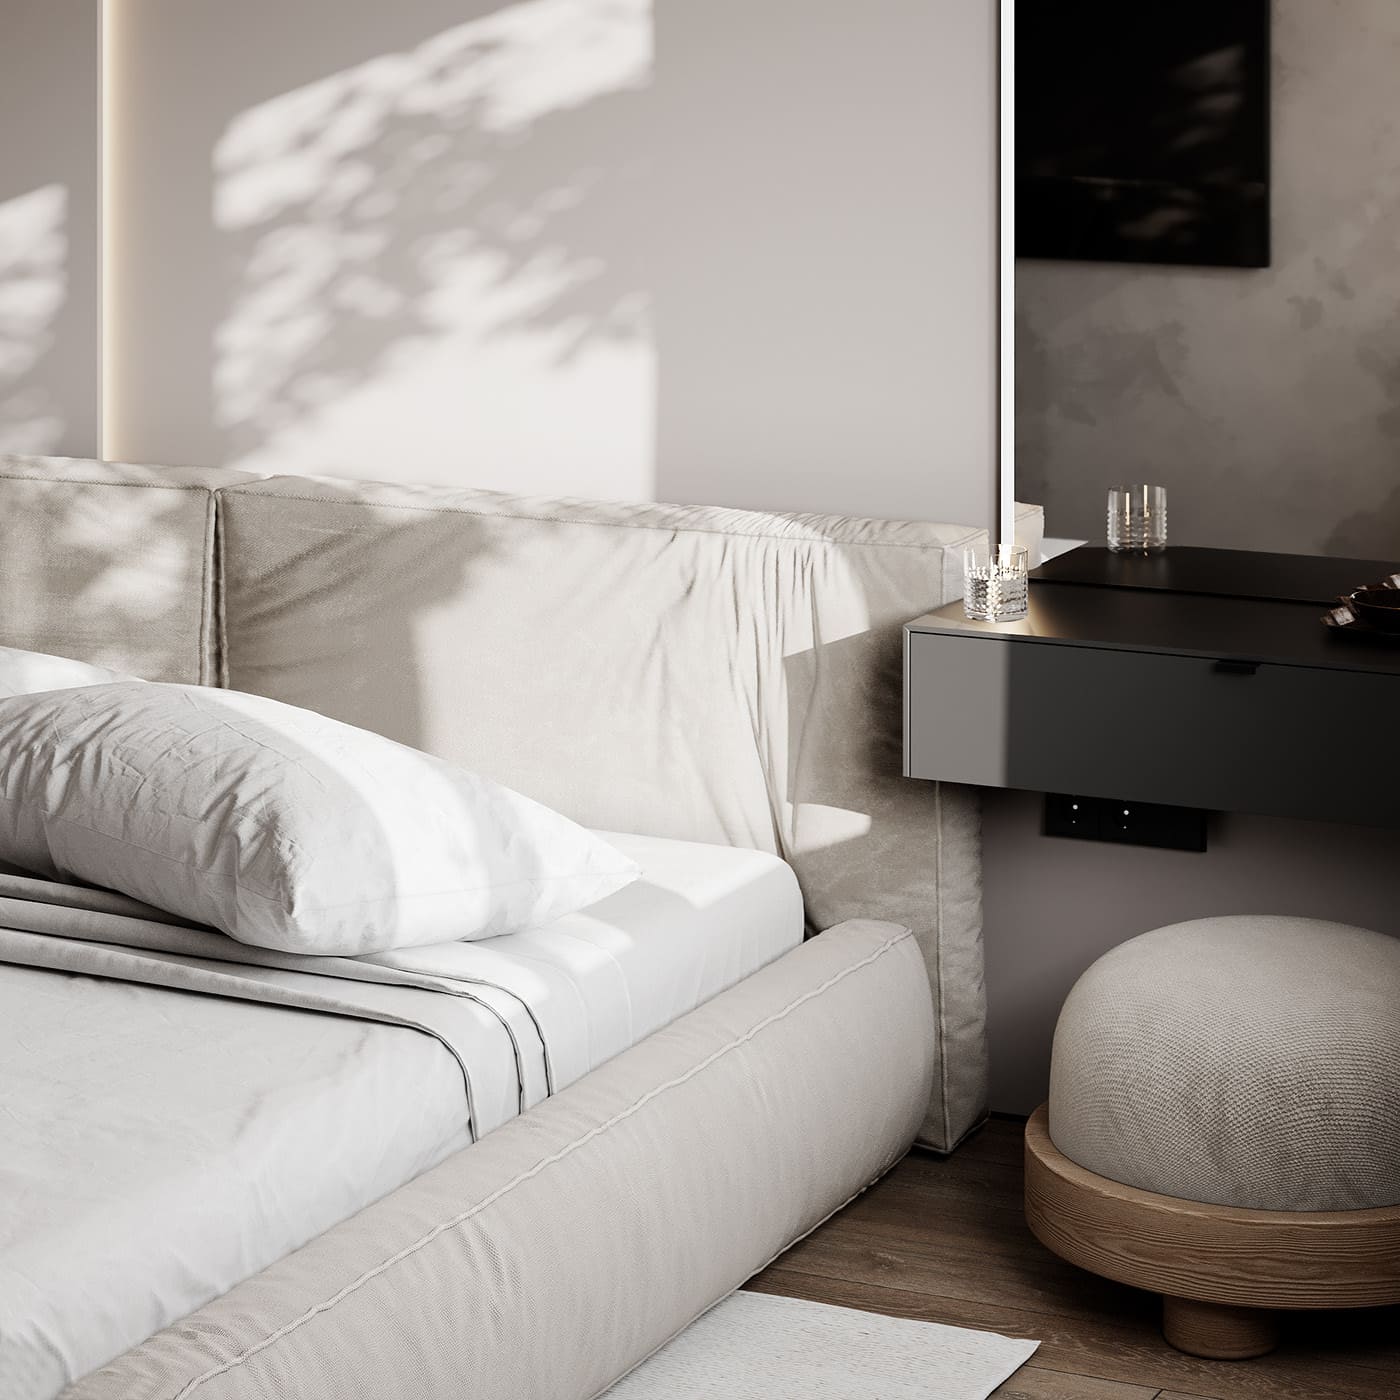 Laconic apartment in the style of minimalism, bedroom, photo 19